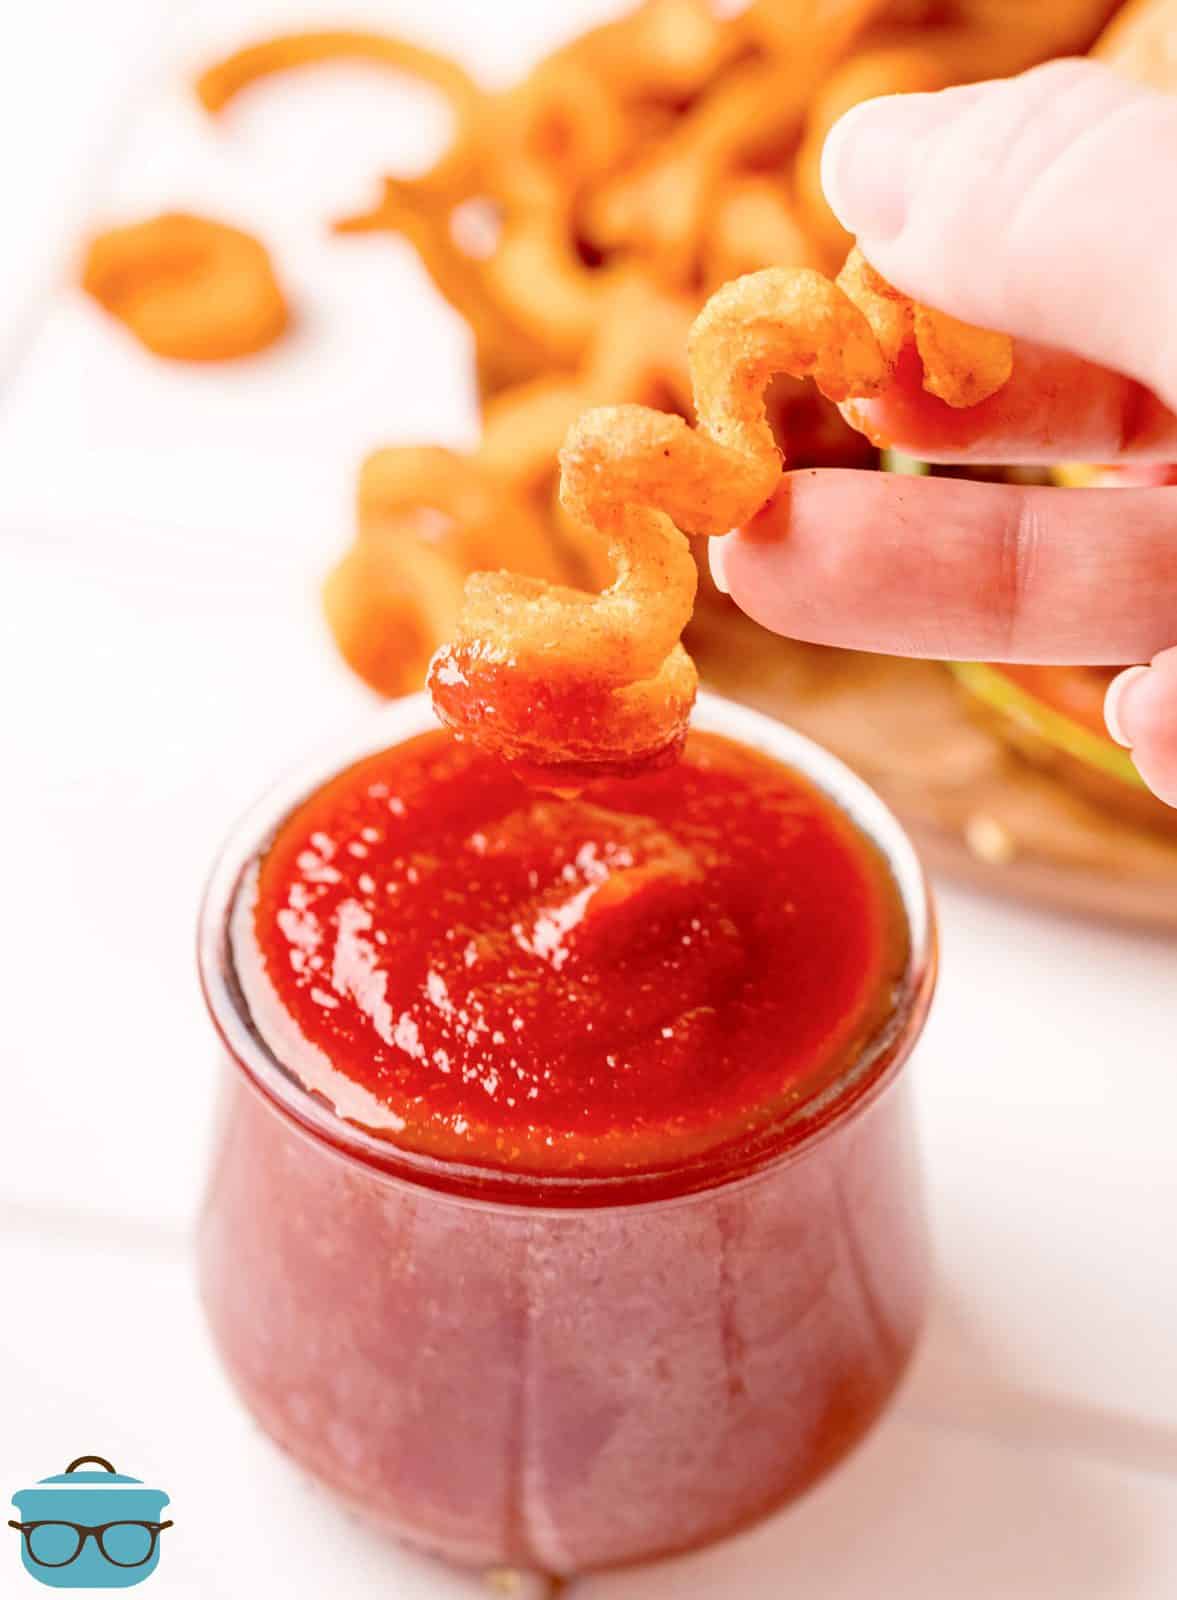 Hand dipping curly fry in Homemade Ketchup.